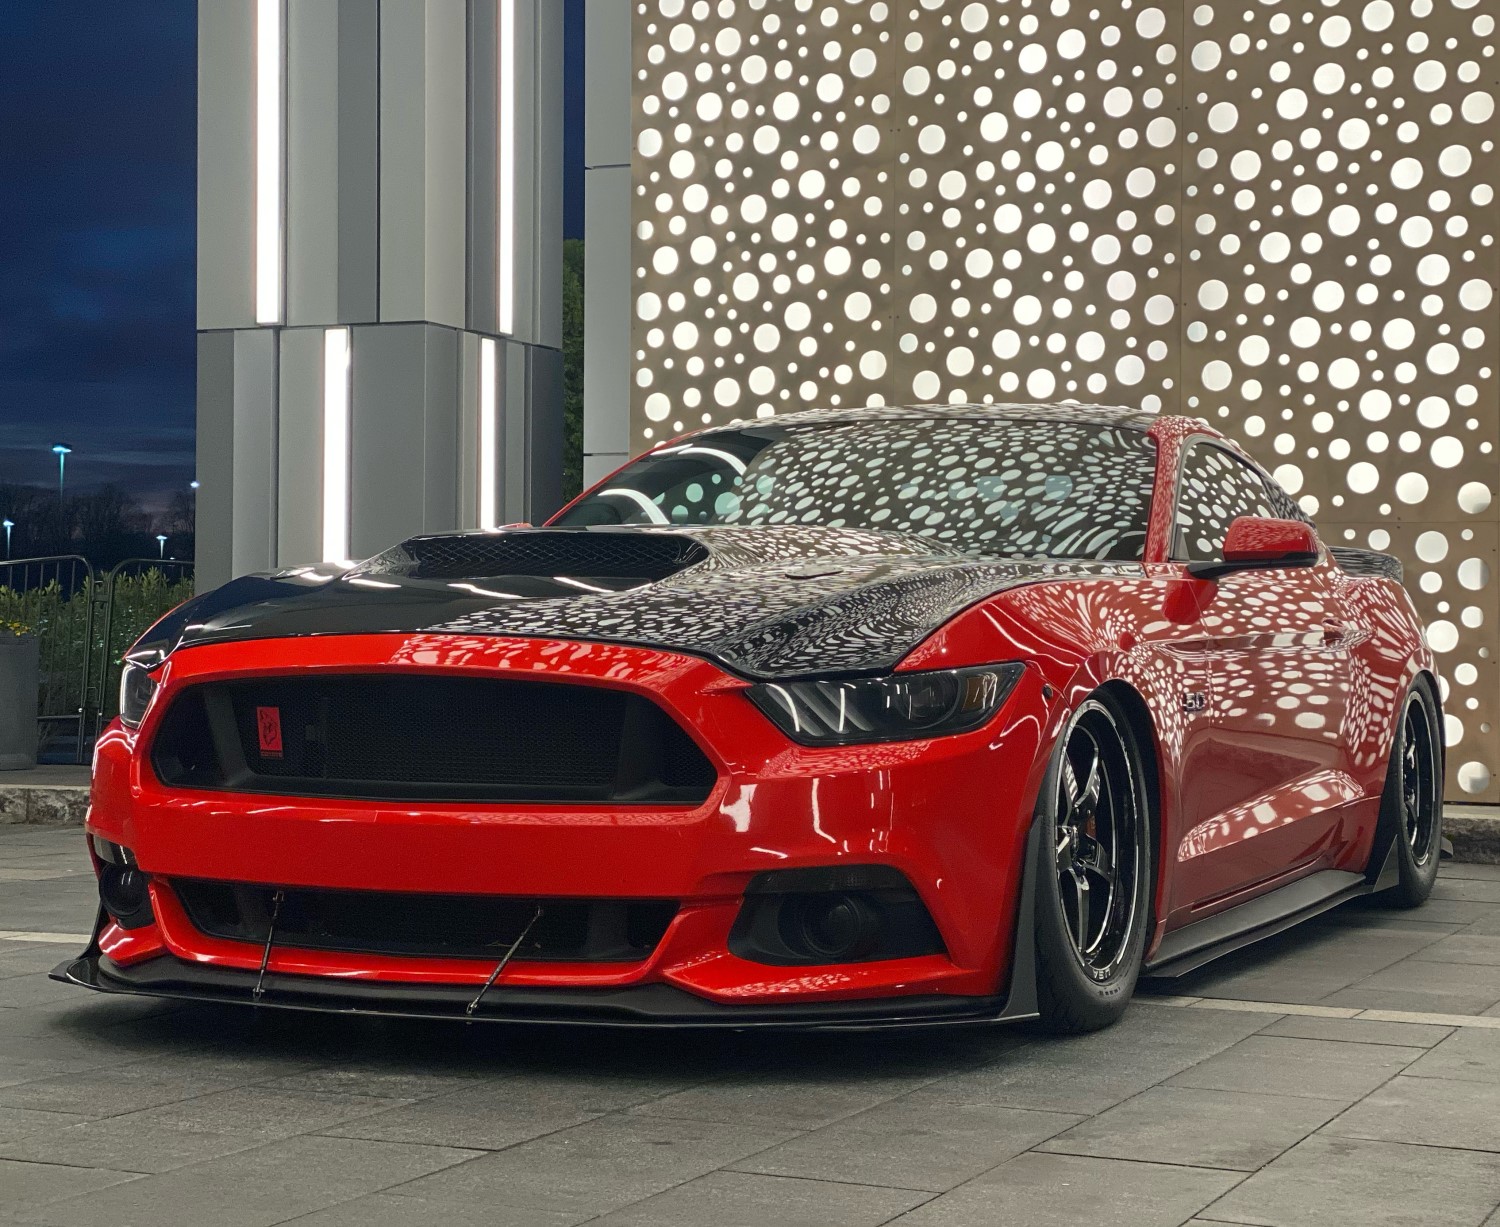 Shine Bright Like a Diamond: Custom Grilles for Your 6th Gen Mustang